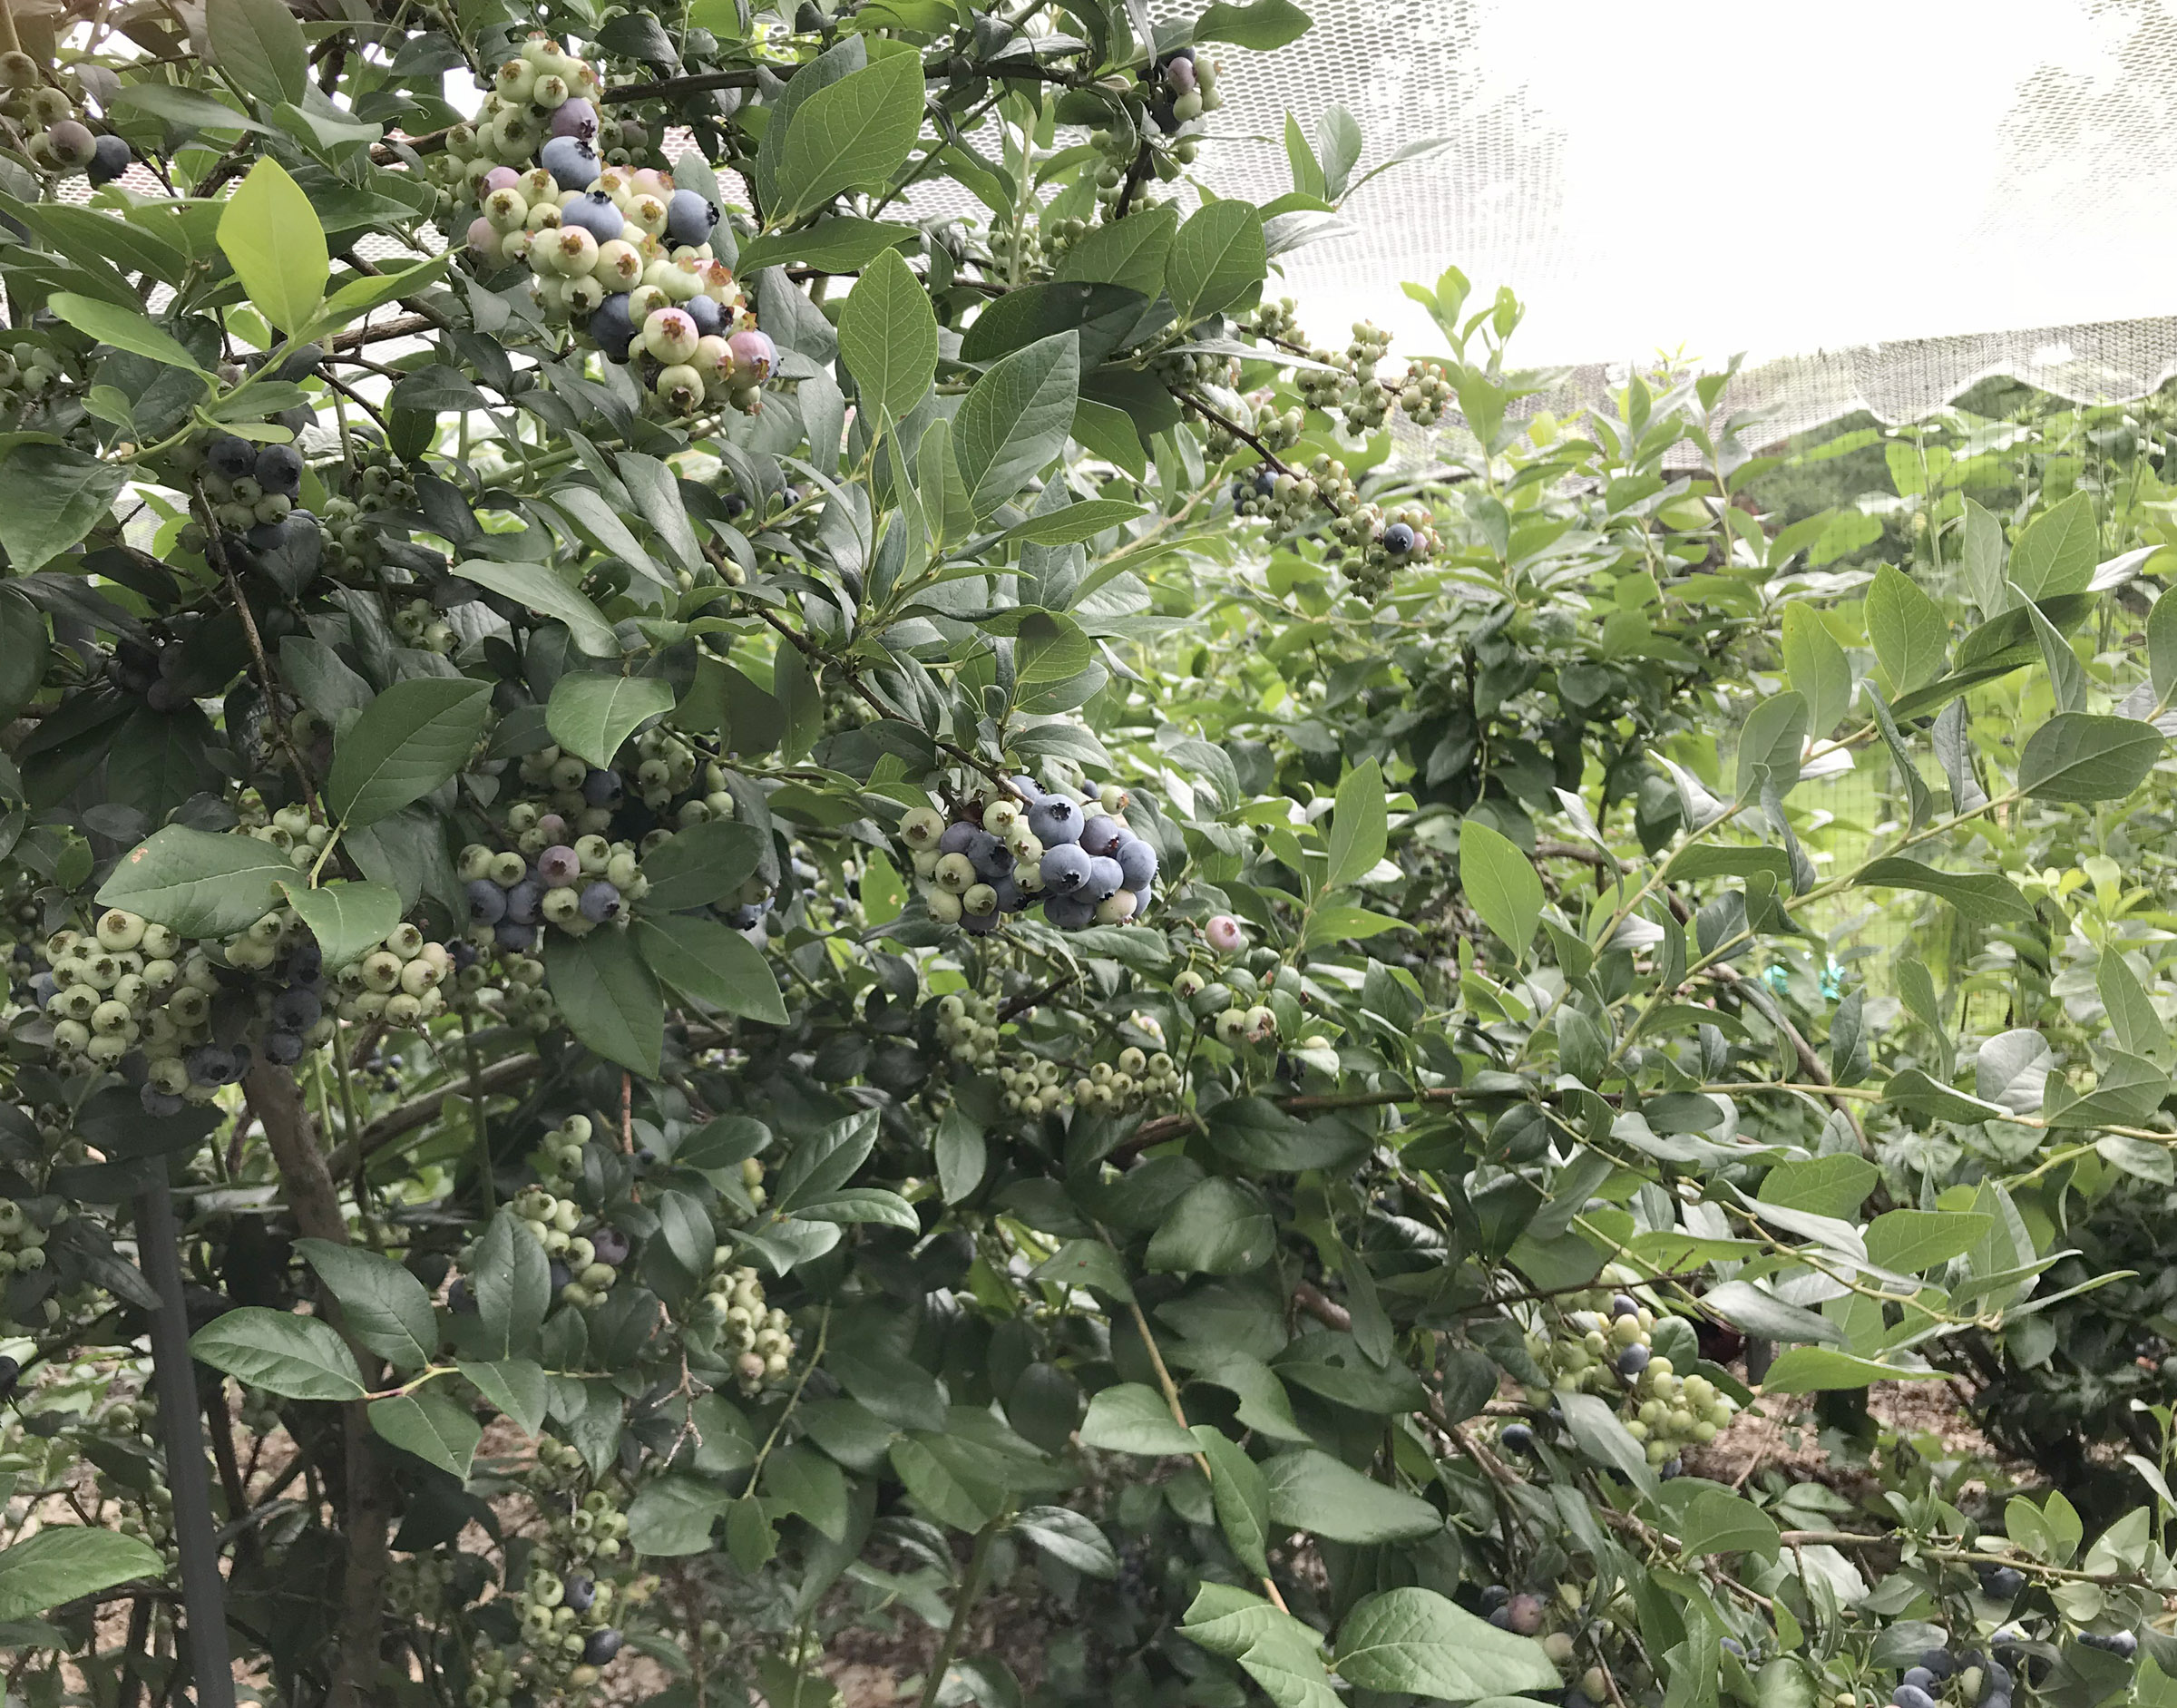 Blueberry patch in early August